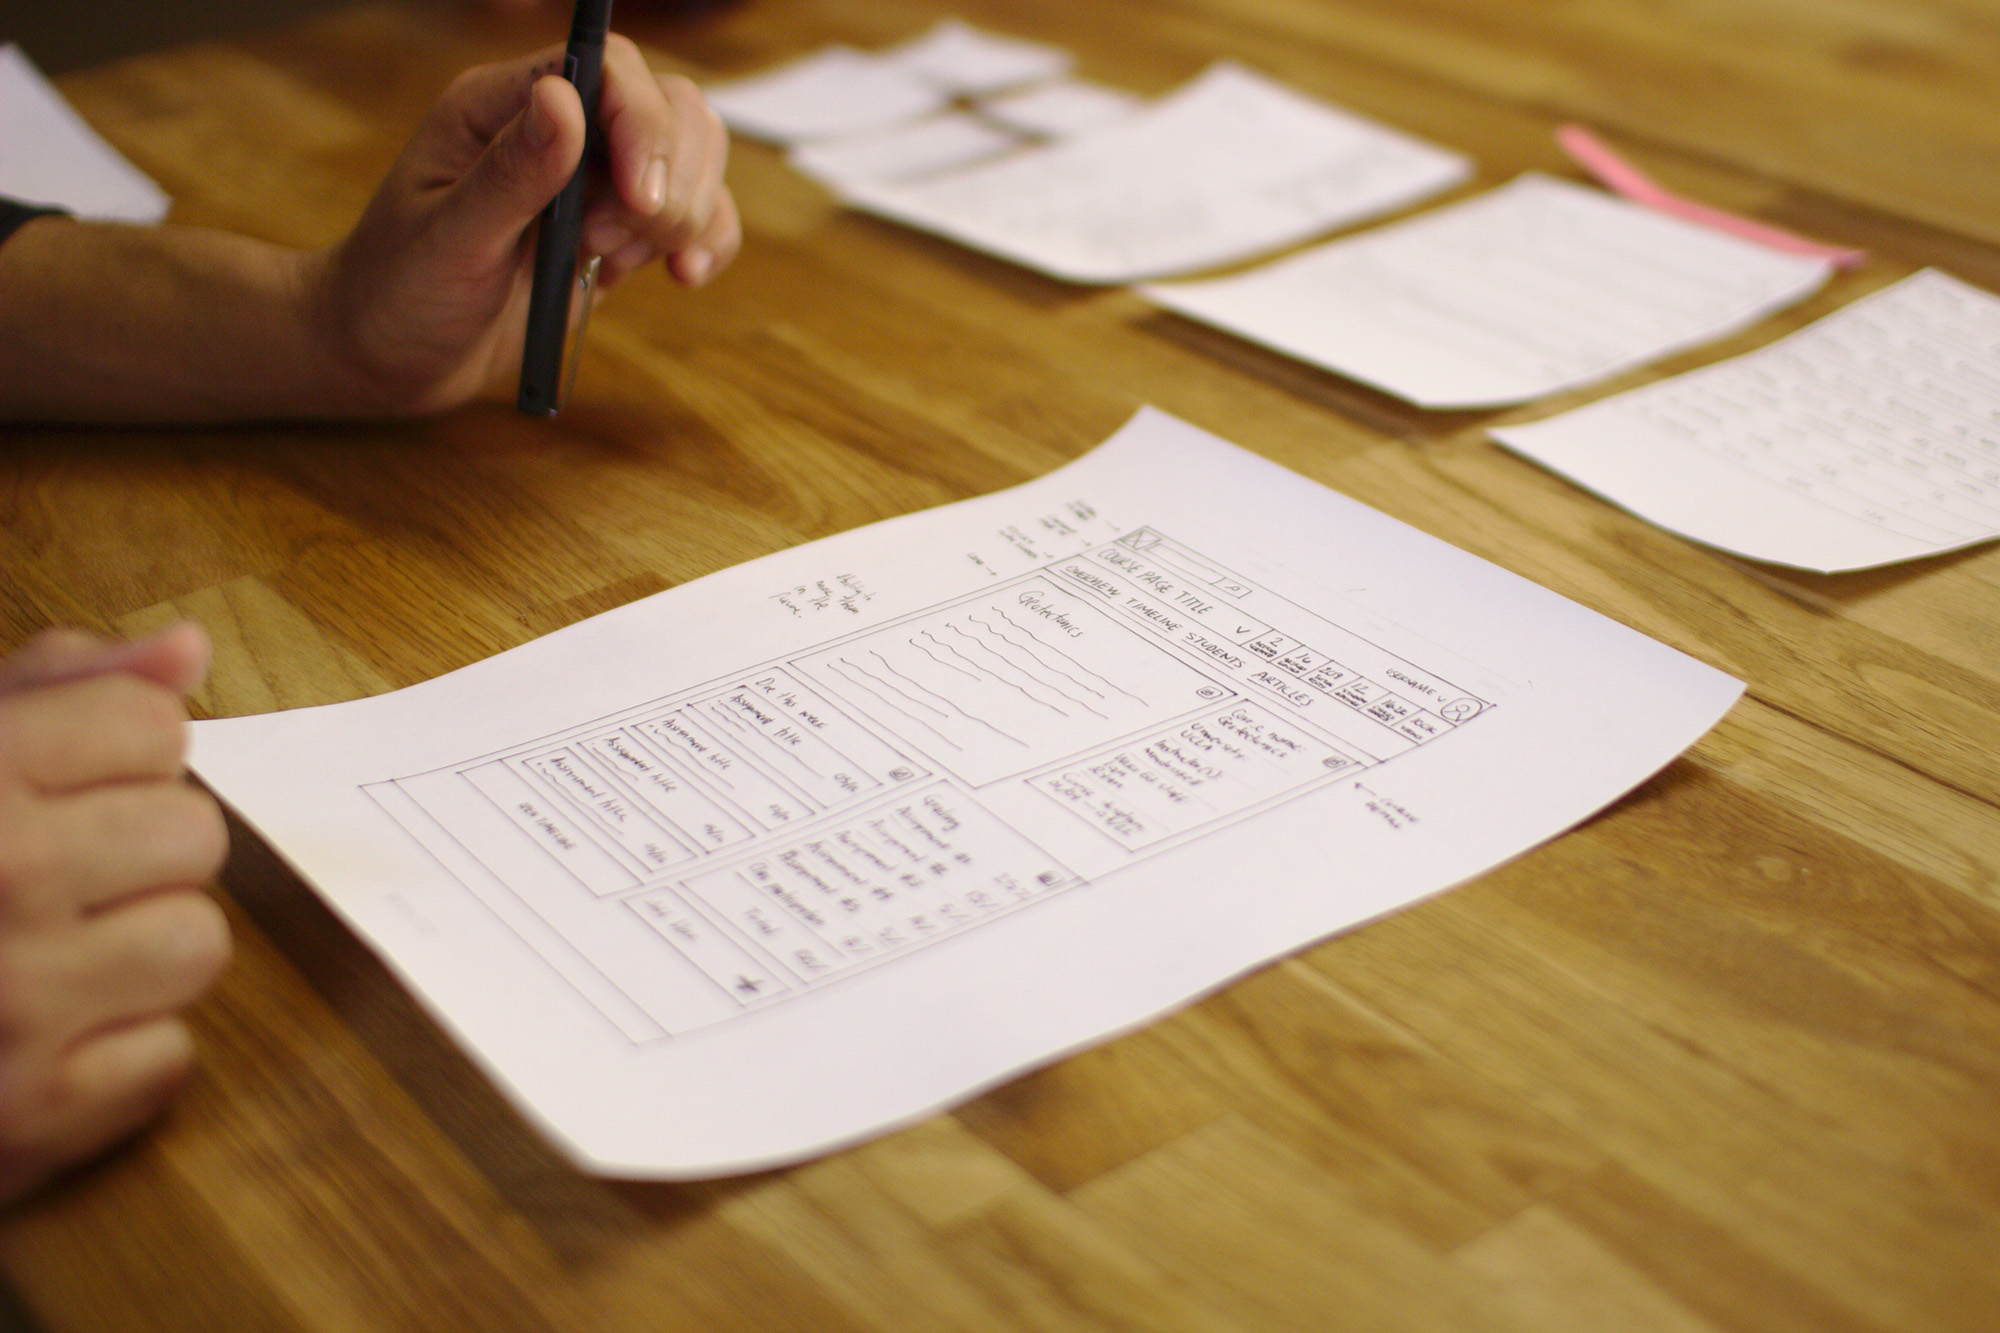 A hand-drawn user interface design on a table